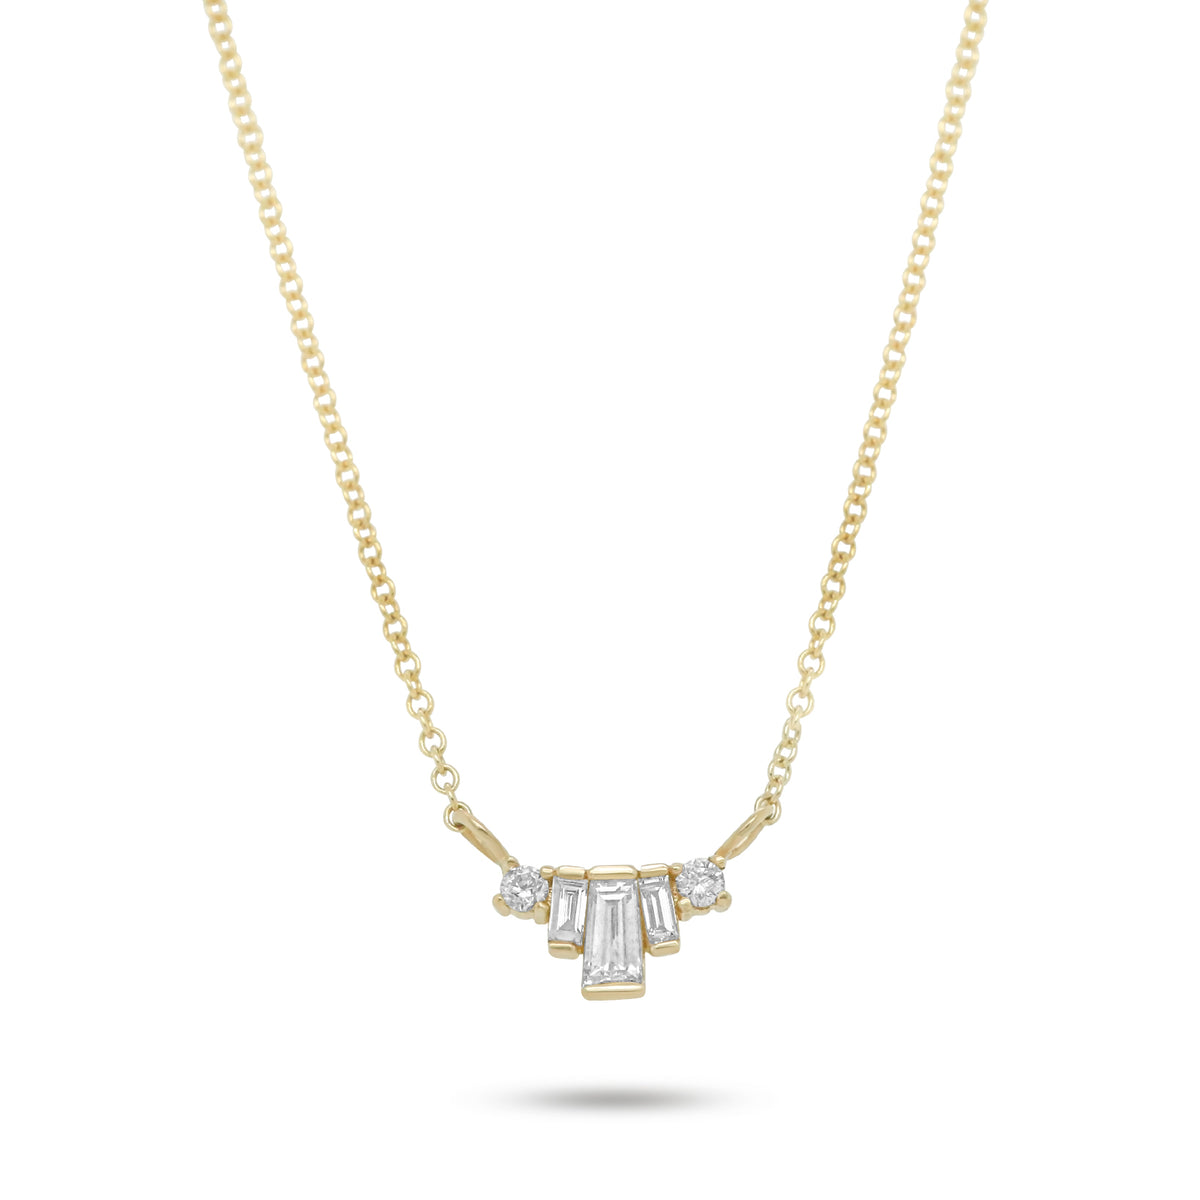 14k yellow gold 16in necklace with baguette and round cut diamonds